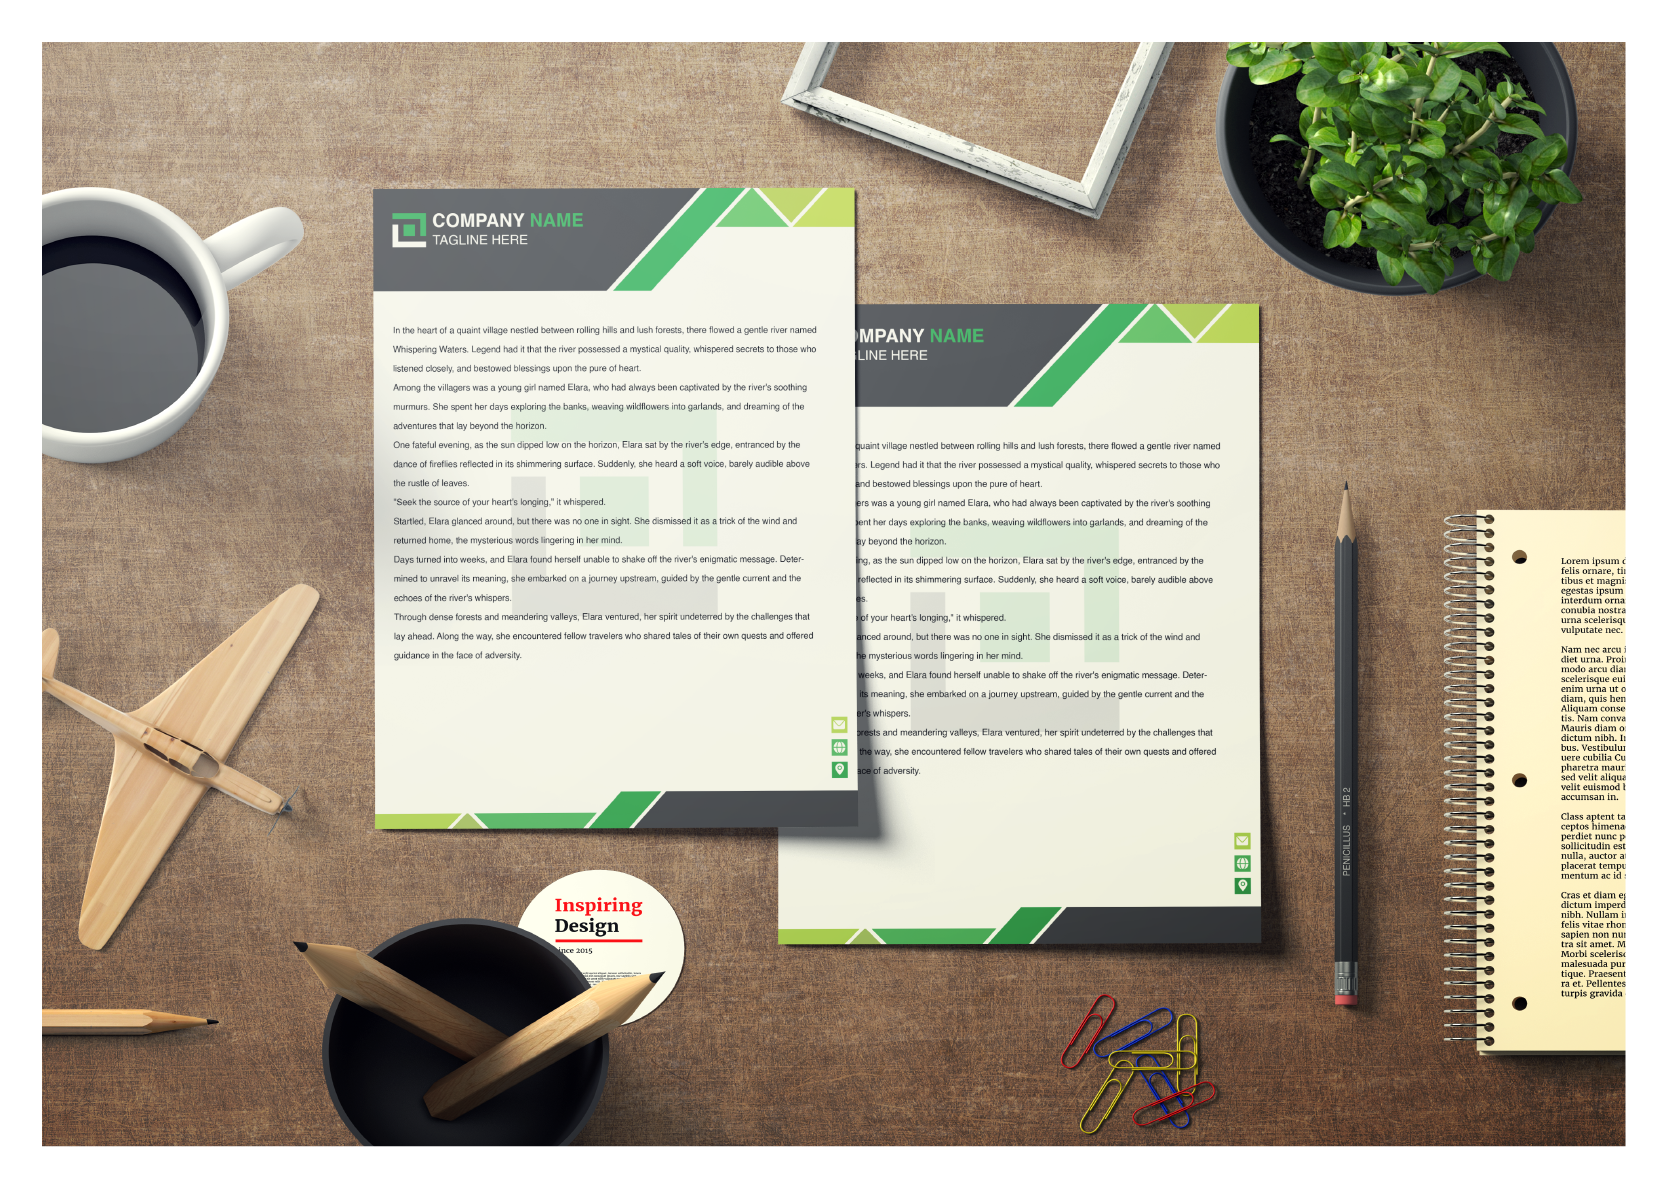 I will design professional letterhead specifically for your company.